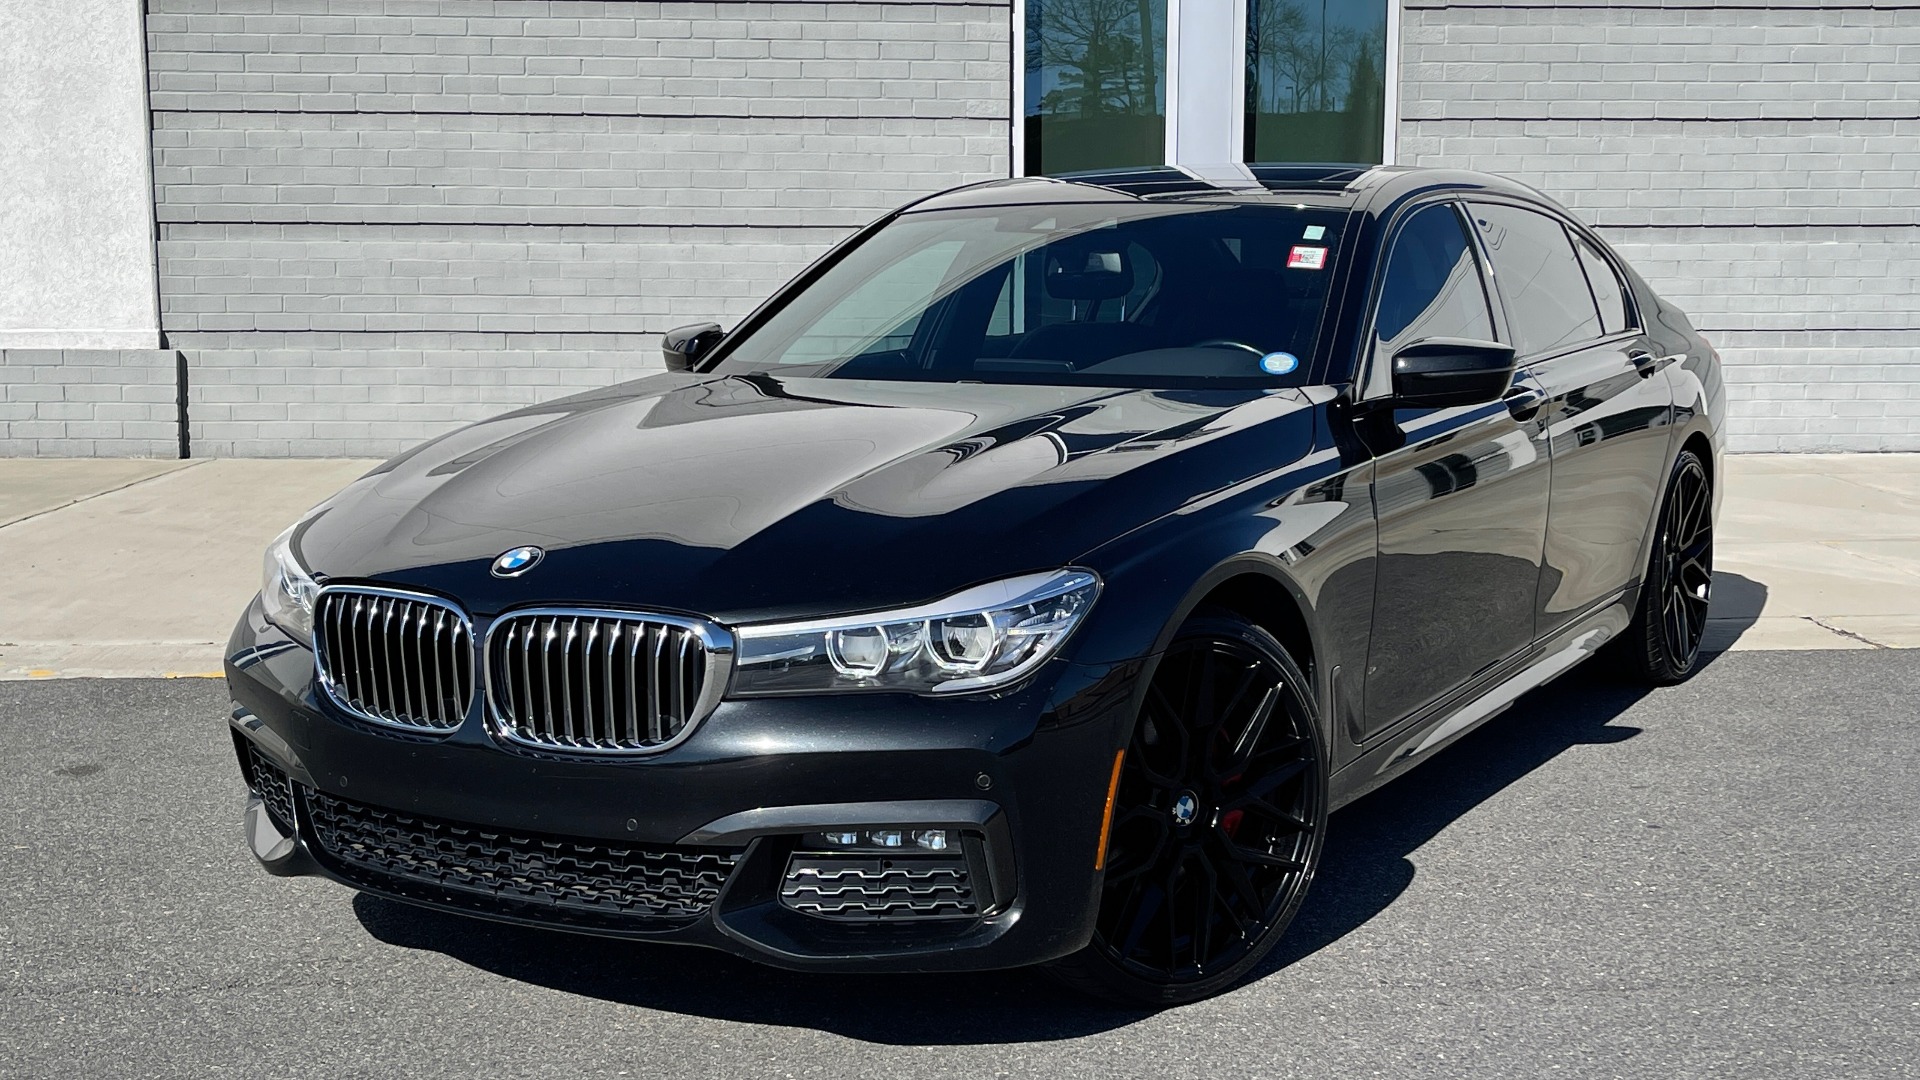 Used 2019 BMW 7 SERIES 740I XDRIVE M-SPORT / CLD WTHR / NAV / SUNROOF / REARVIEW for sale $53,000 at Formula Imports in Charlotte NC 28227 1